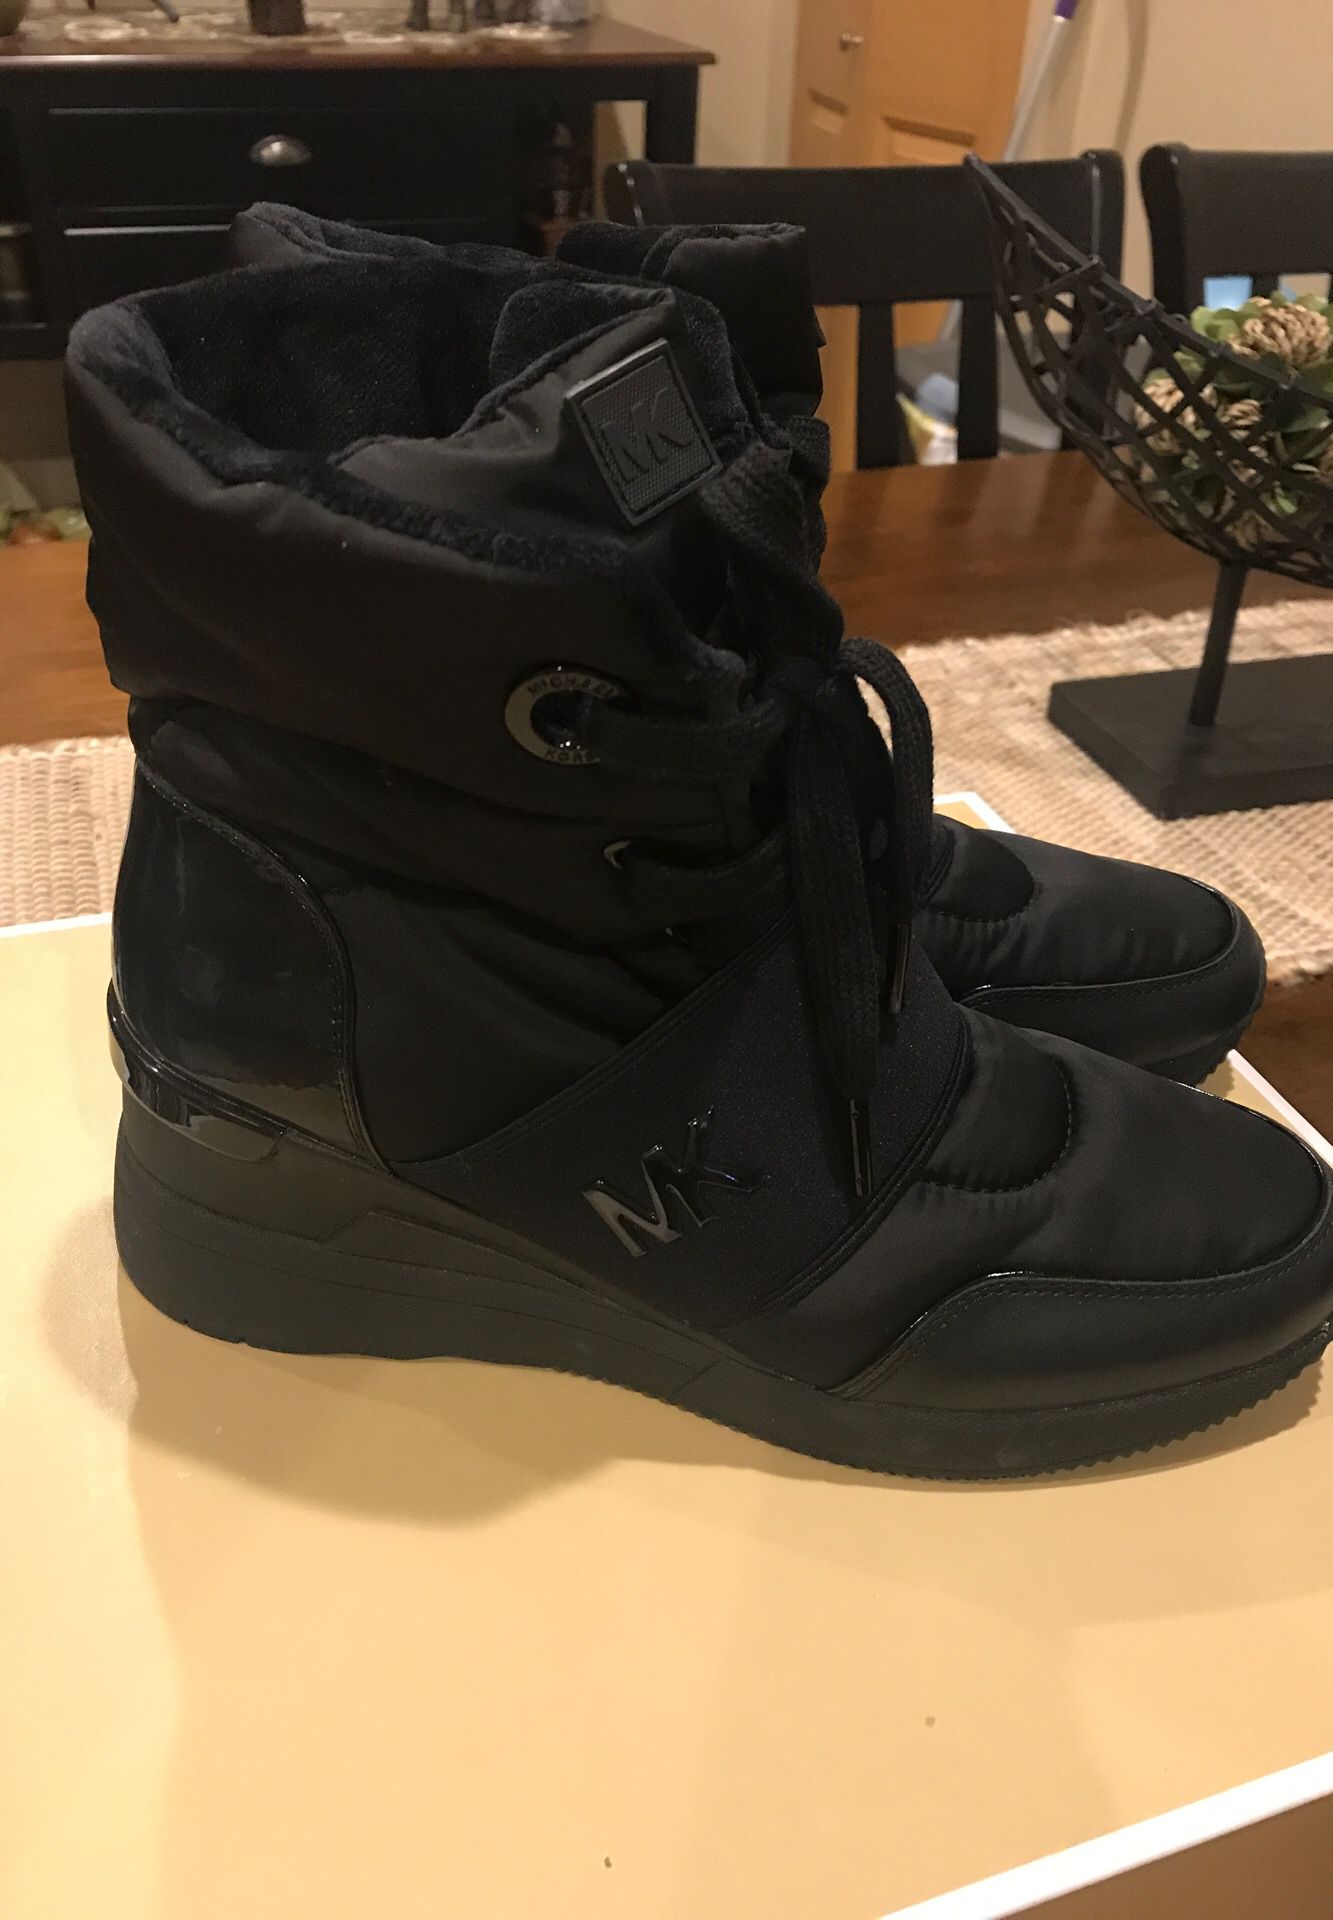 Brand New Michael Kors boots , Size 8. Never used